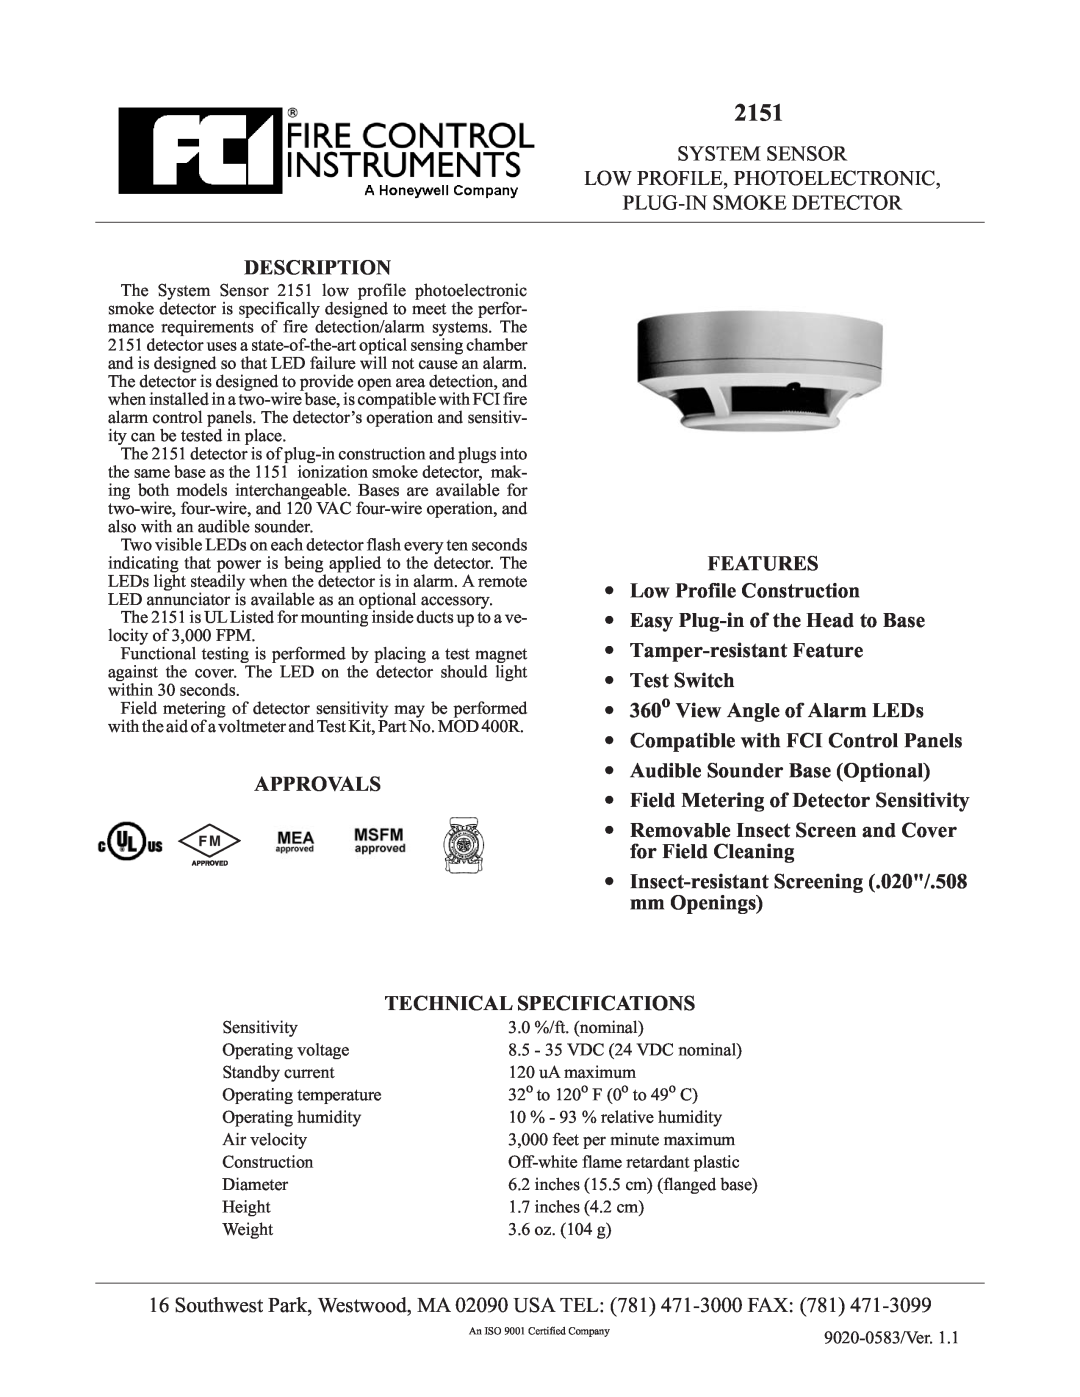 FCI Home Appliances 2151 technical specifications Description, Approvals, Field Metering of Detector Sensitivity 